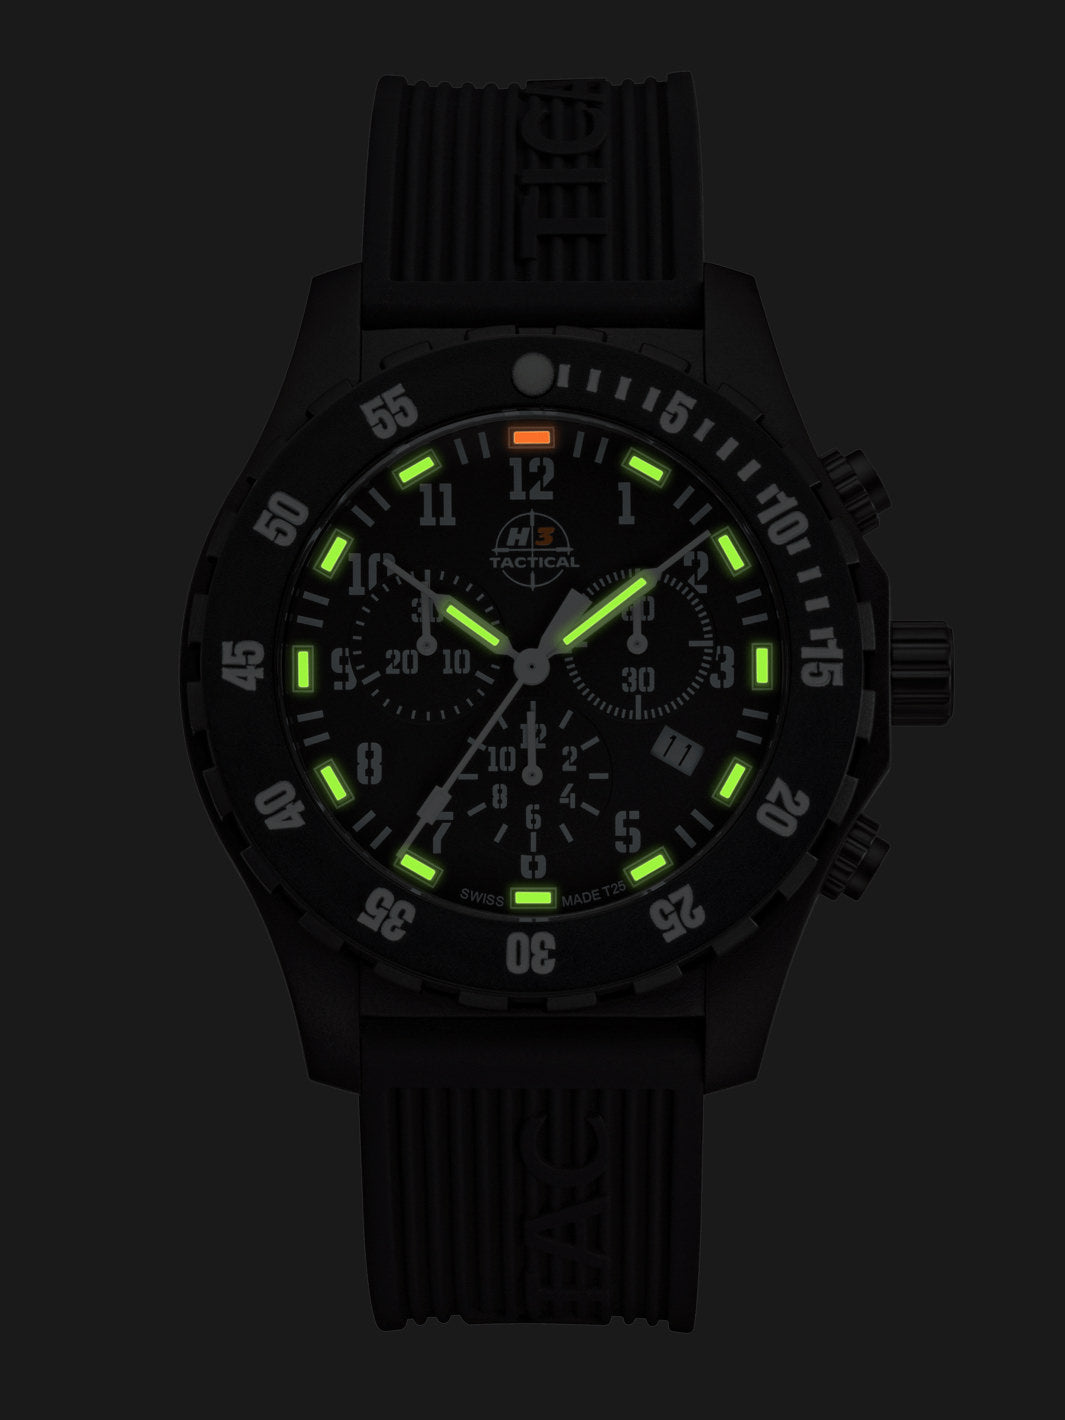 H3TACTICAL Trooper Carbon White Chronograph H3 Uhr mit Silikonband